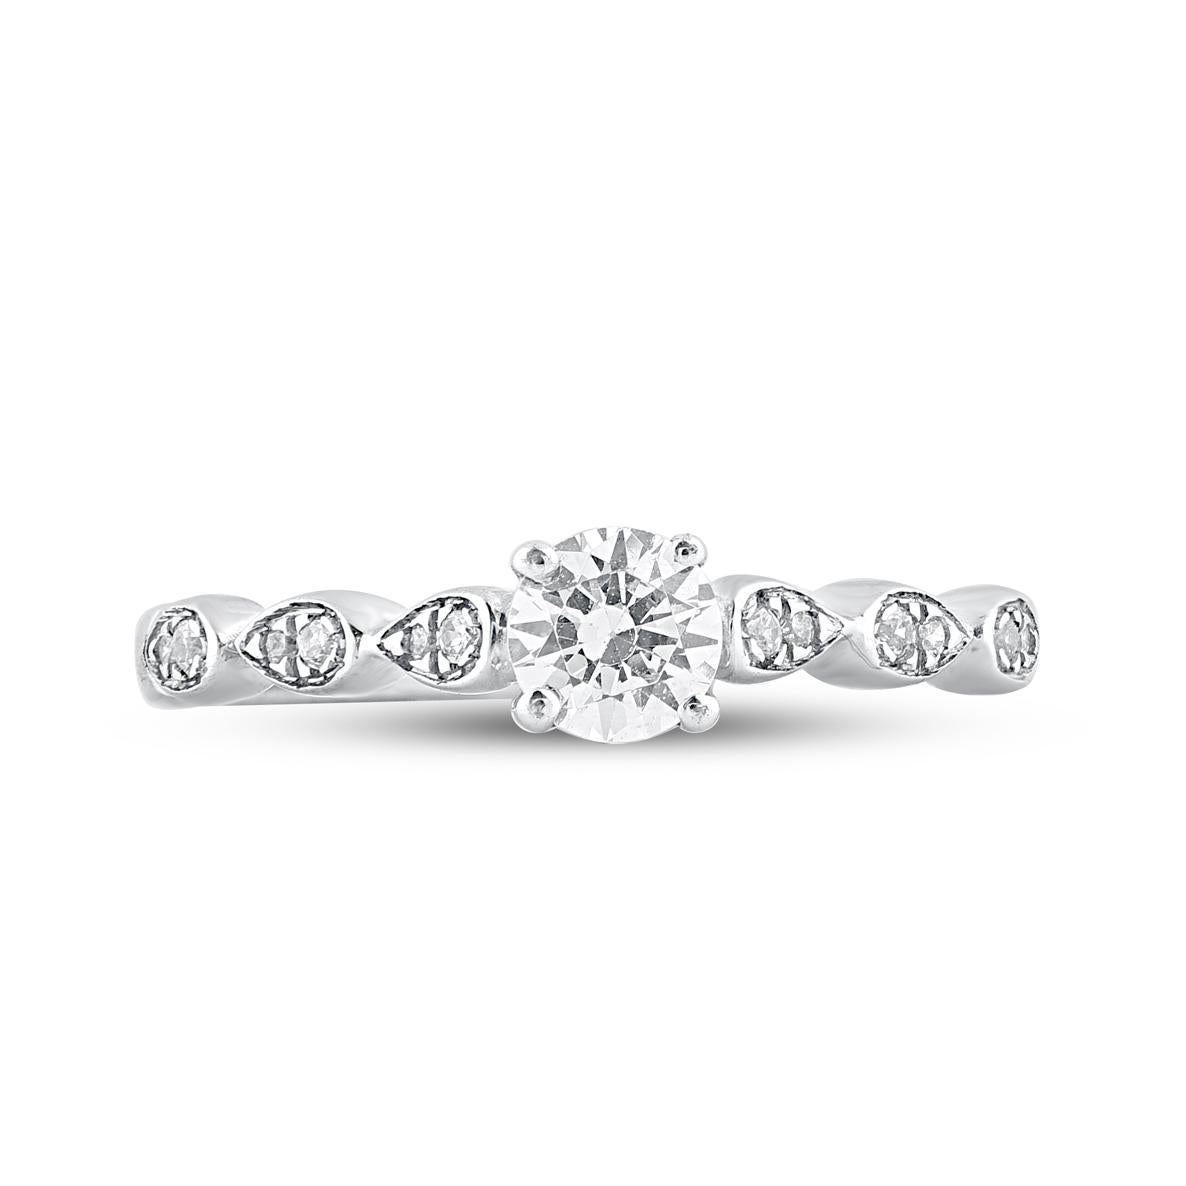 Give a touch of glamour to your fine jewelry collection with this diamond engagement ring. Expertly crafted in 14 Karat white gold and shines with 13 single cut and brilliant cut diamond in prong and pave setting. The total weight of diamonds 0.50